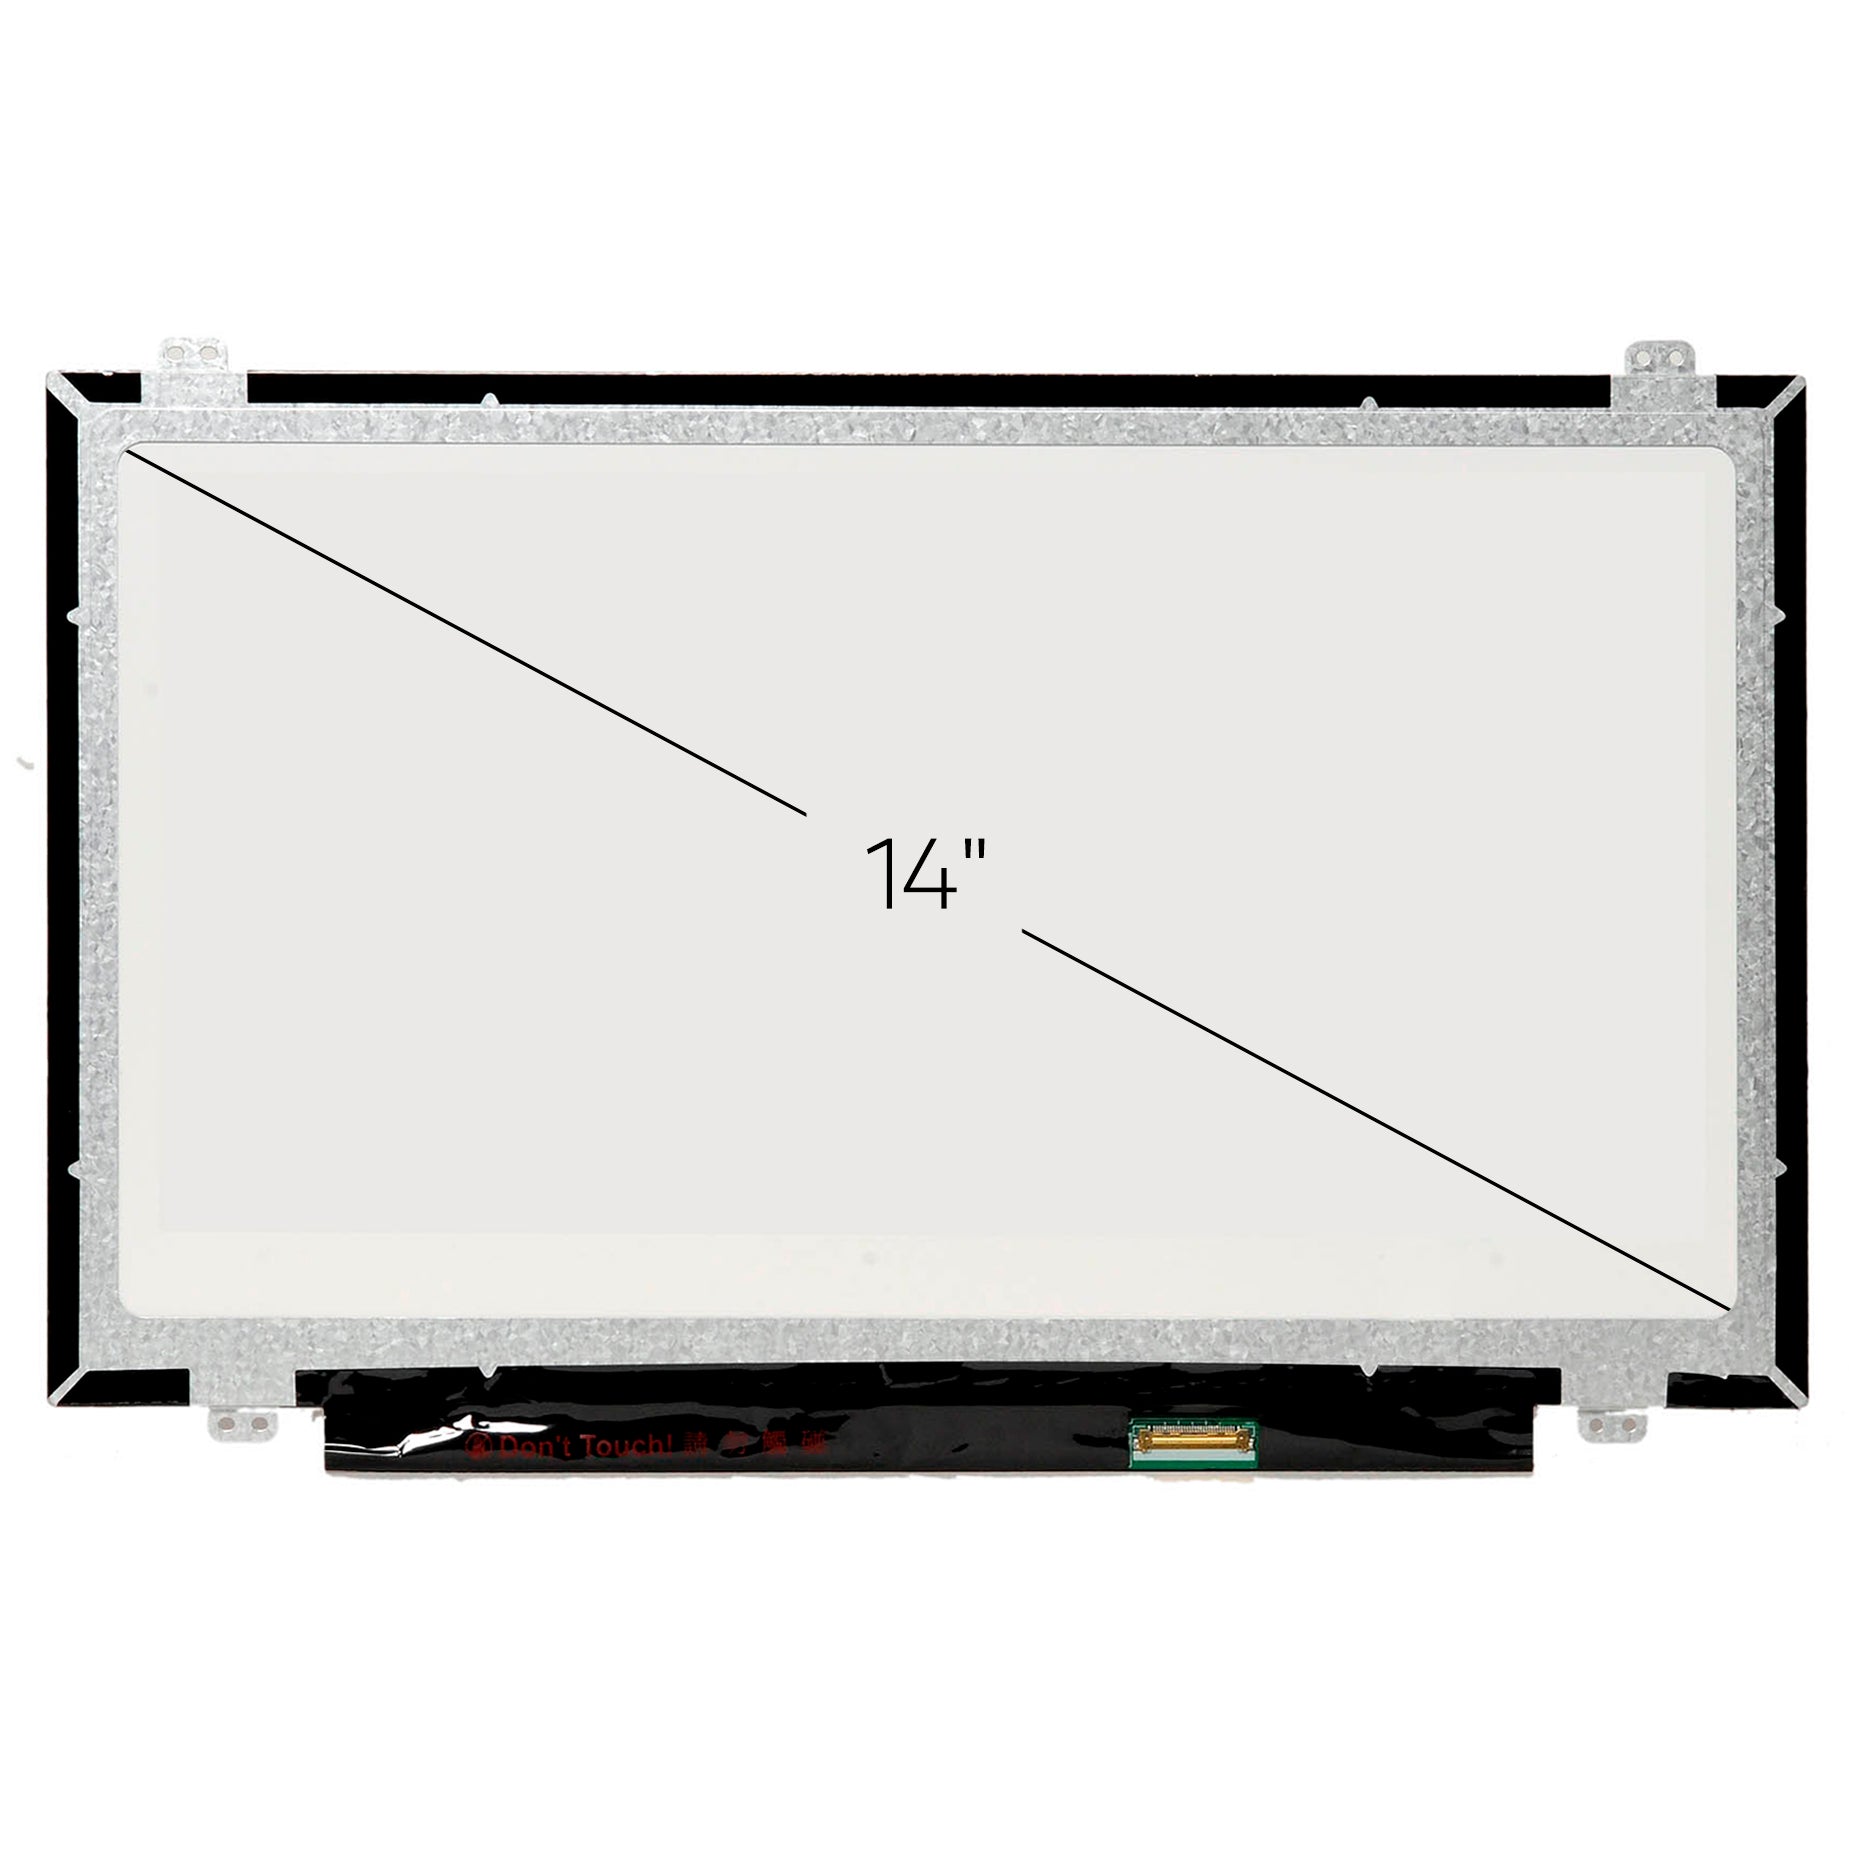 Screen Replacement for Dell Inspiron 3451 HD 1366x768 Glossy LCD LED Display